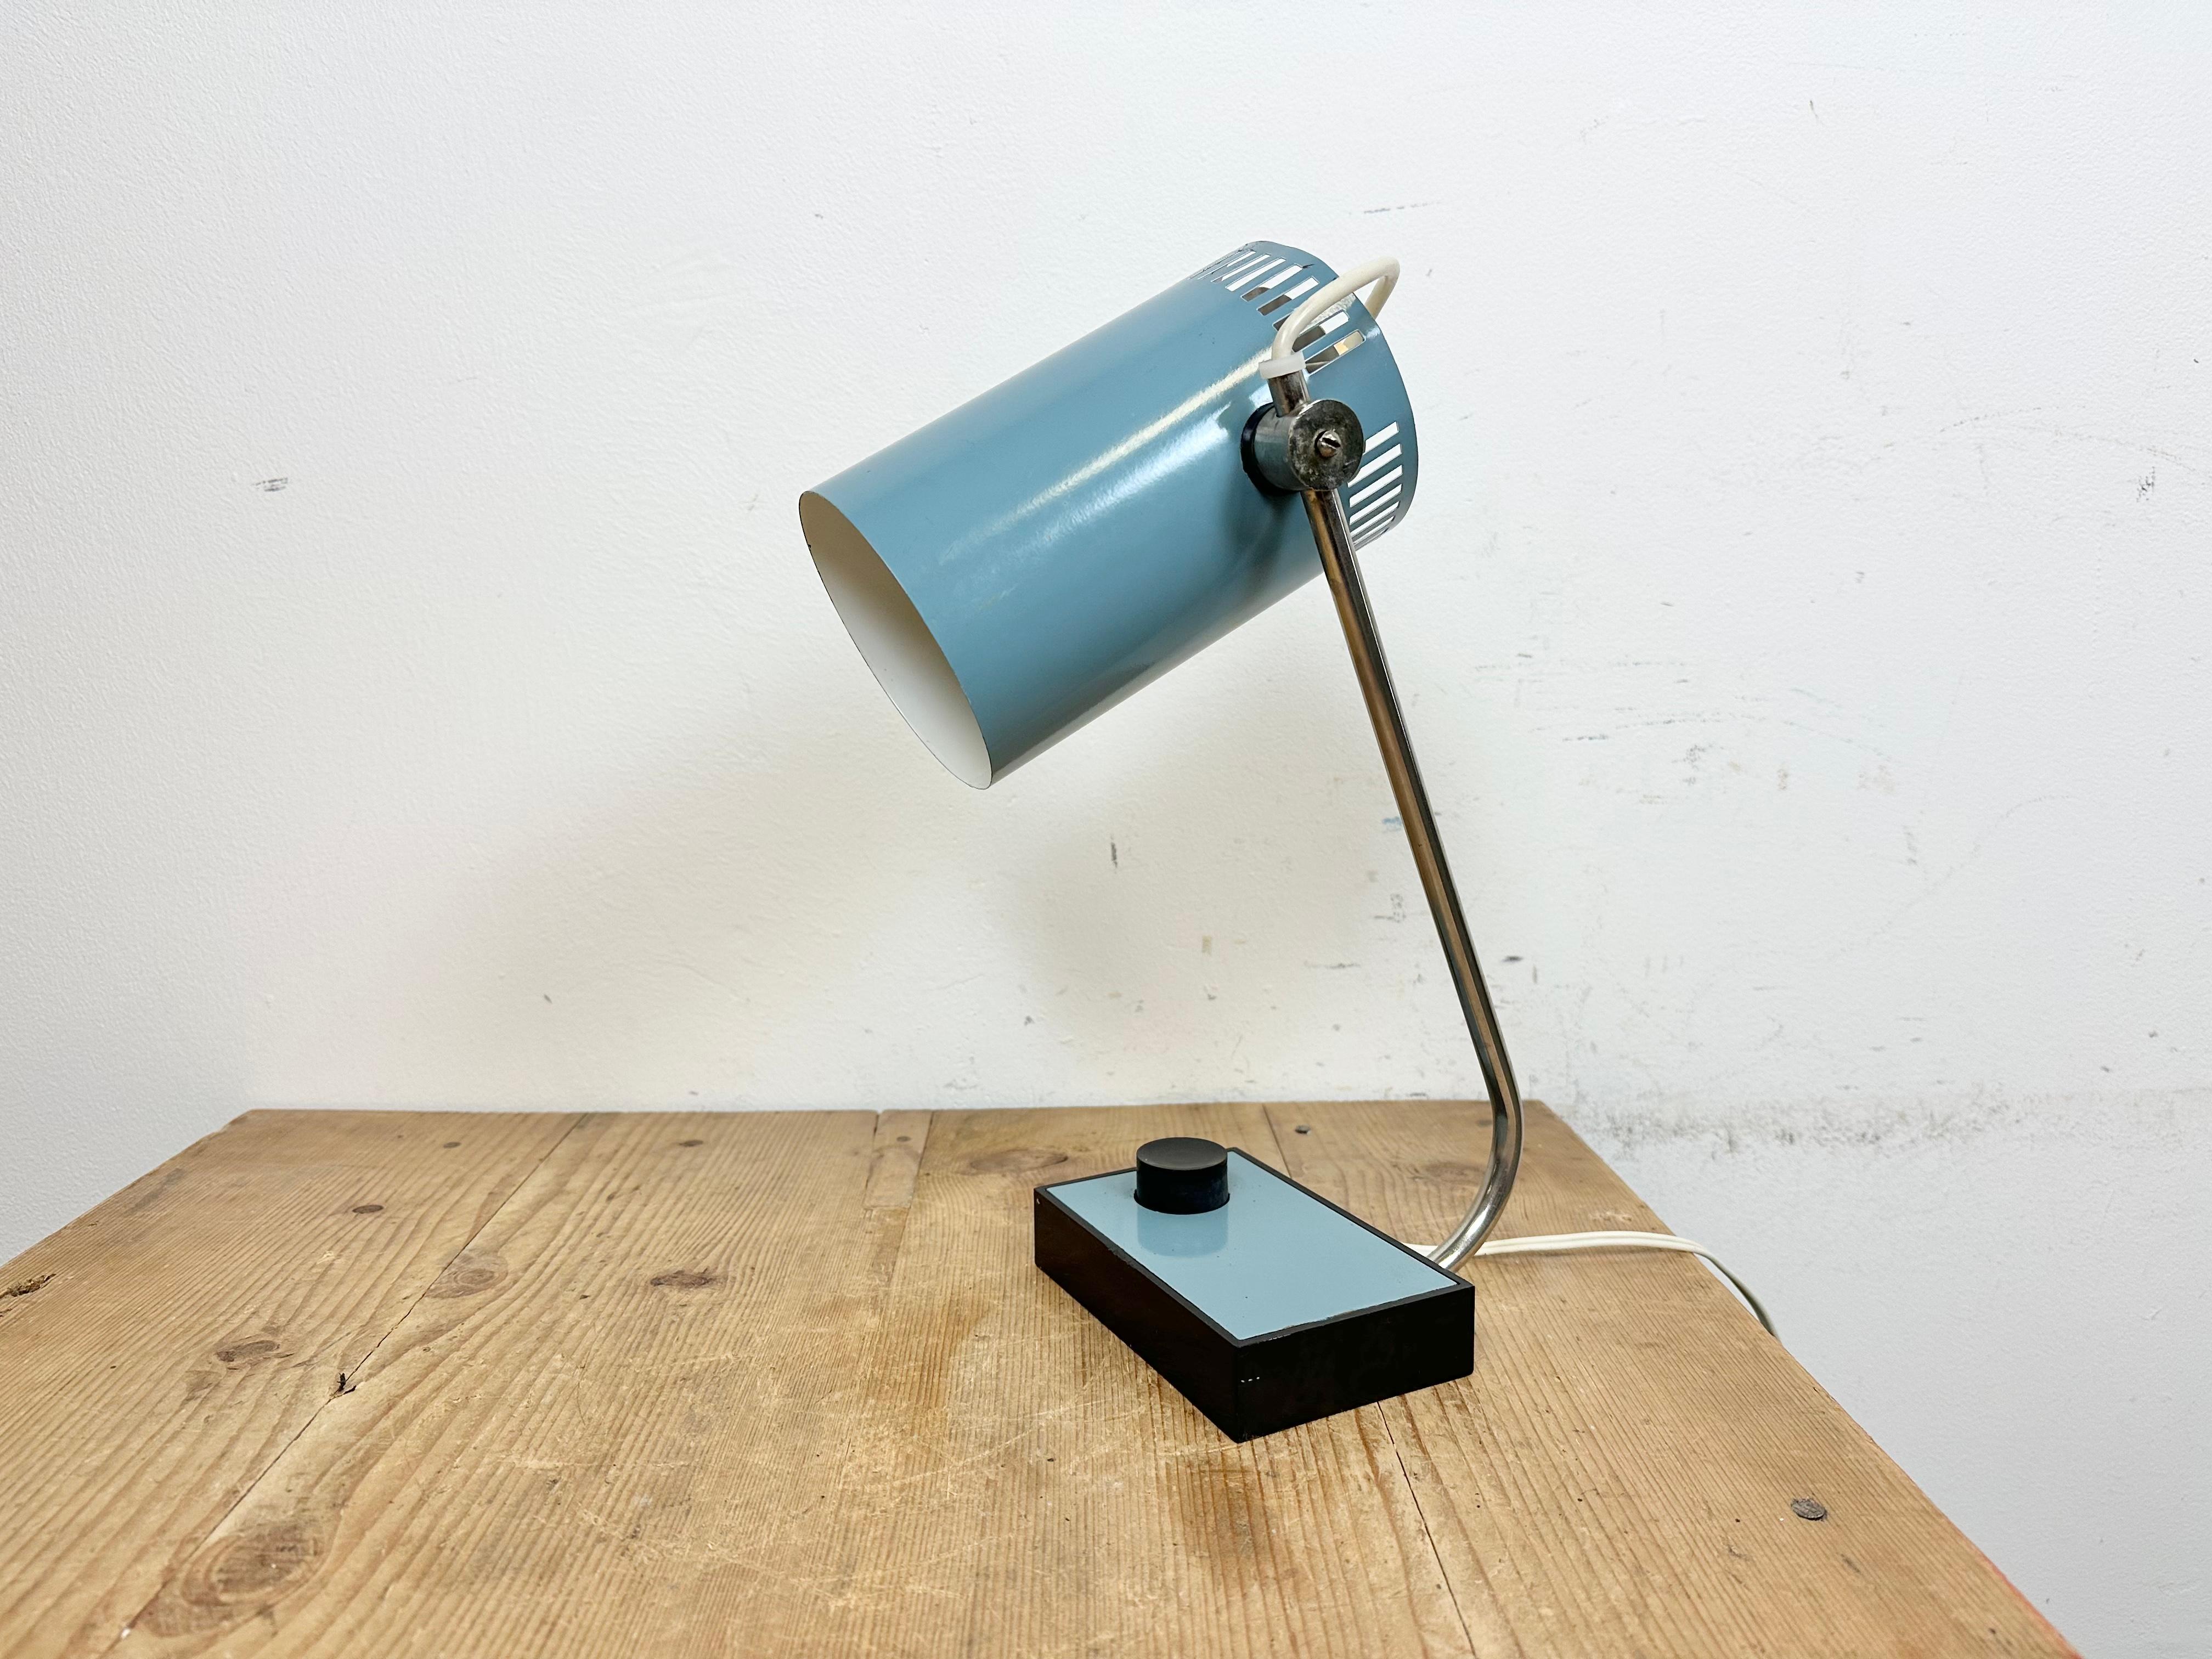 Vintage blue table lamp made in former Czechoslovakia during the 1960s. It features a bakelite base with switch, a blue metal adjustable shade and chrome plated arm. The original socket requires E 27/ E26 light bulbs. The weight of the lamp is 0,8